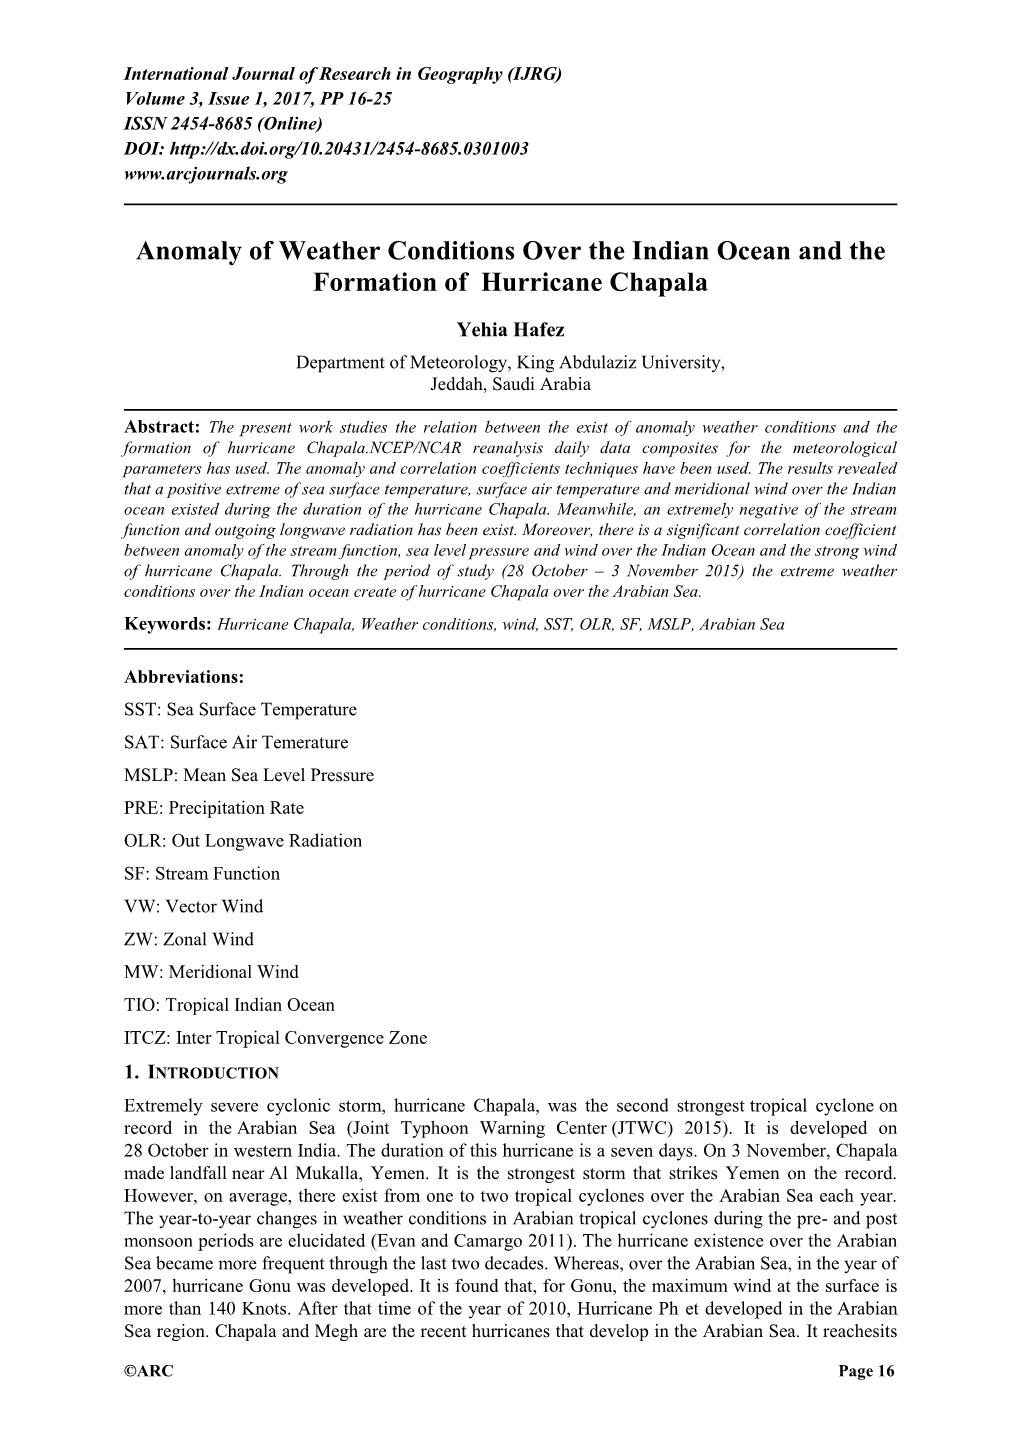 Anomaly of Weather Conditions Over the Indian Ocean and the Formation of Hurricane Chapala